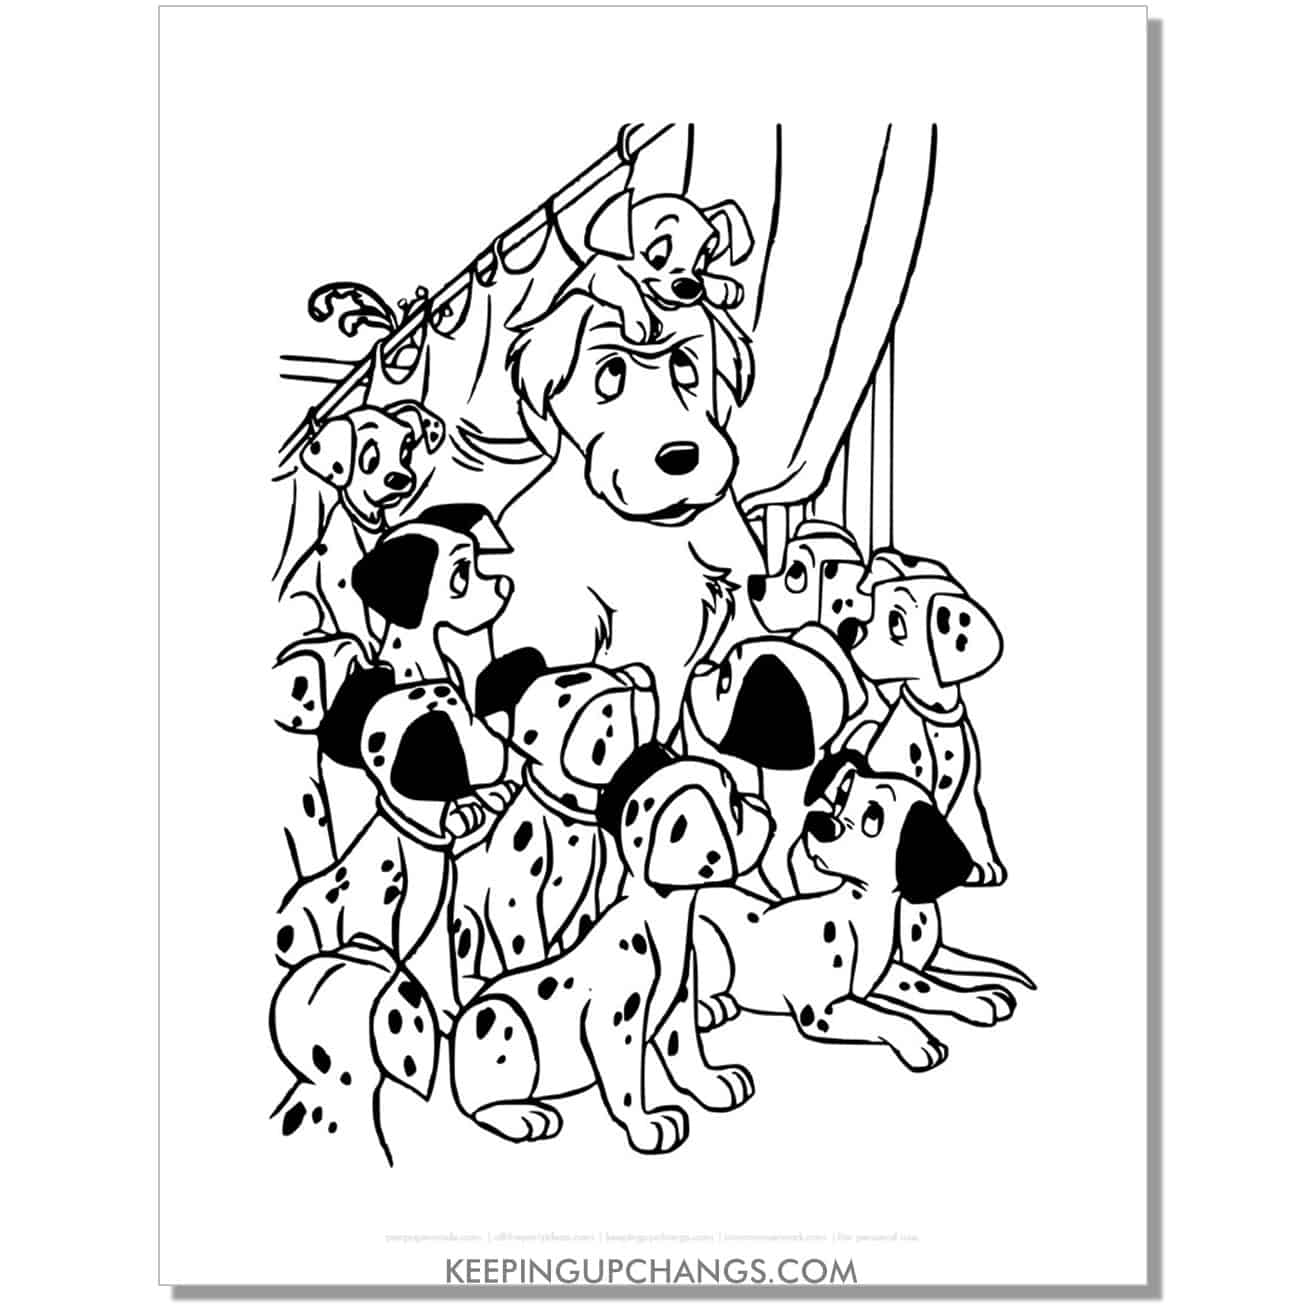 free pups sitting on colonel's head 101 dalmations coloring page, sheet.